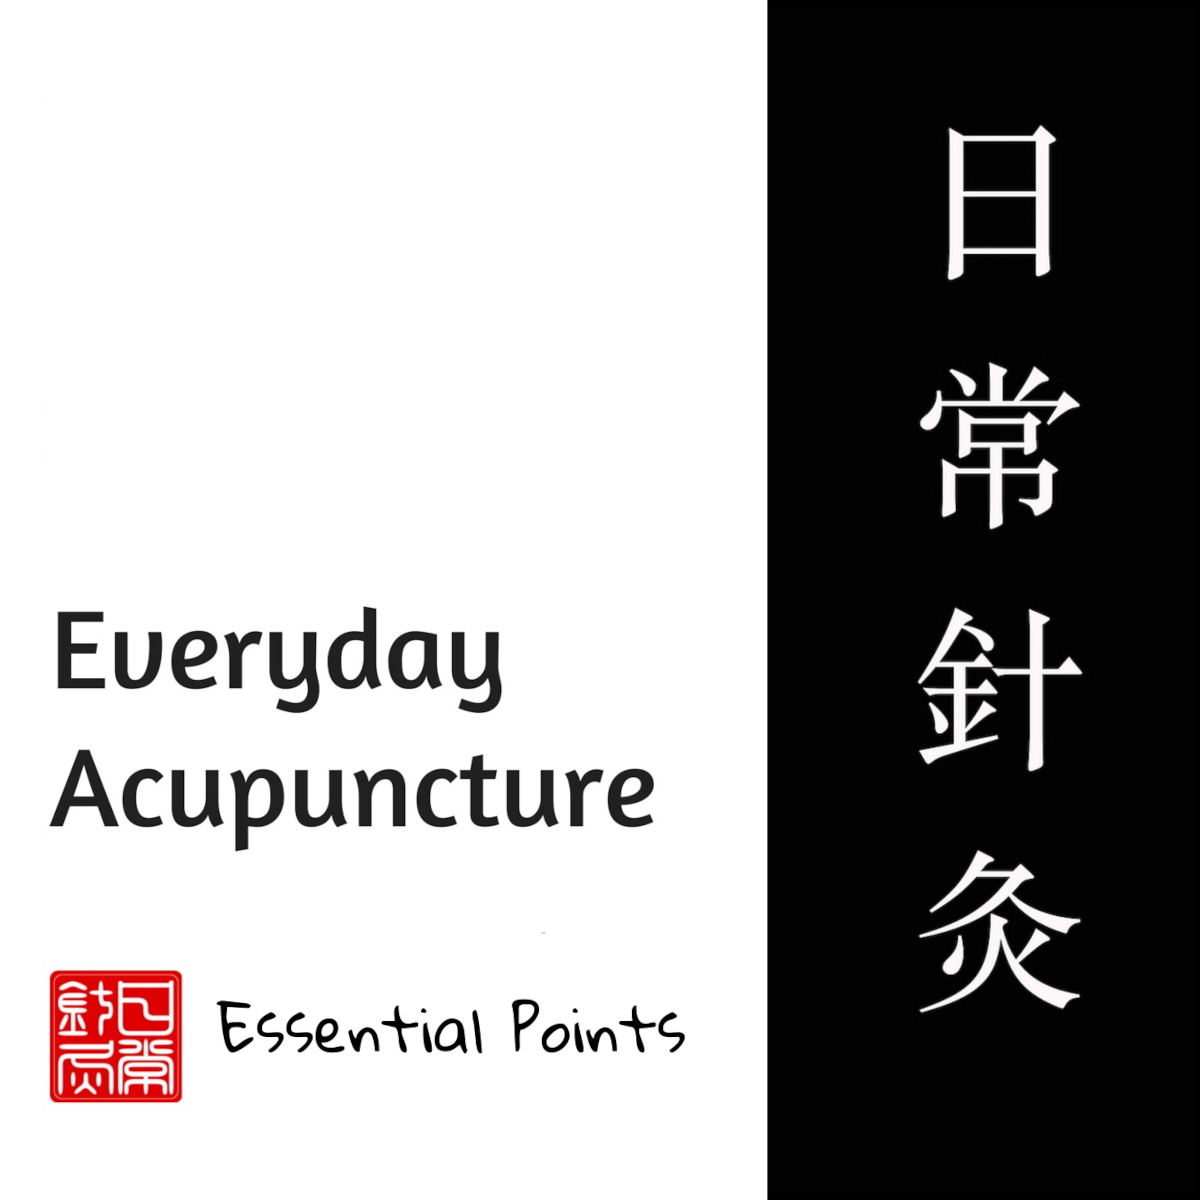 EAP-092 Is Chinese Medicine The Same As Acupuncture? with Dr. Heidi Lovie DACM